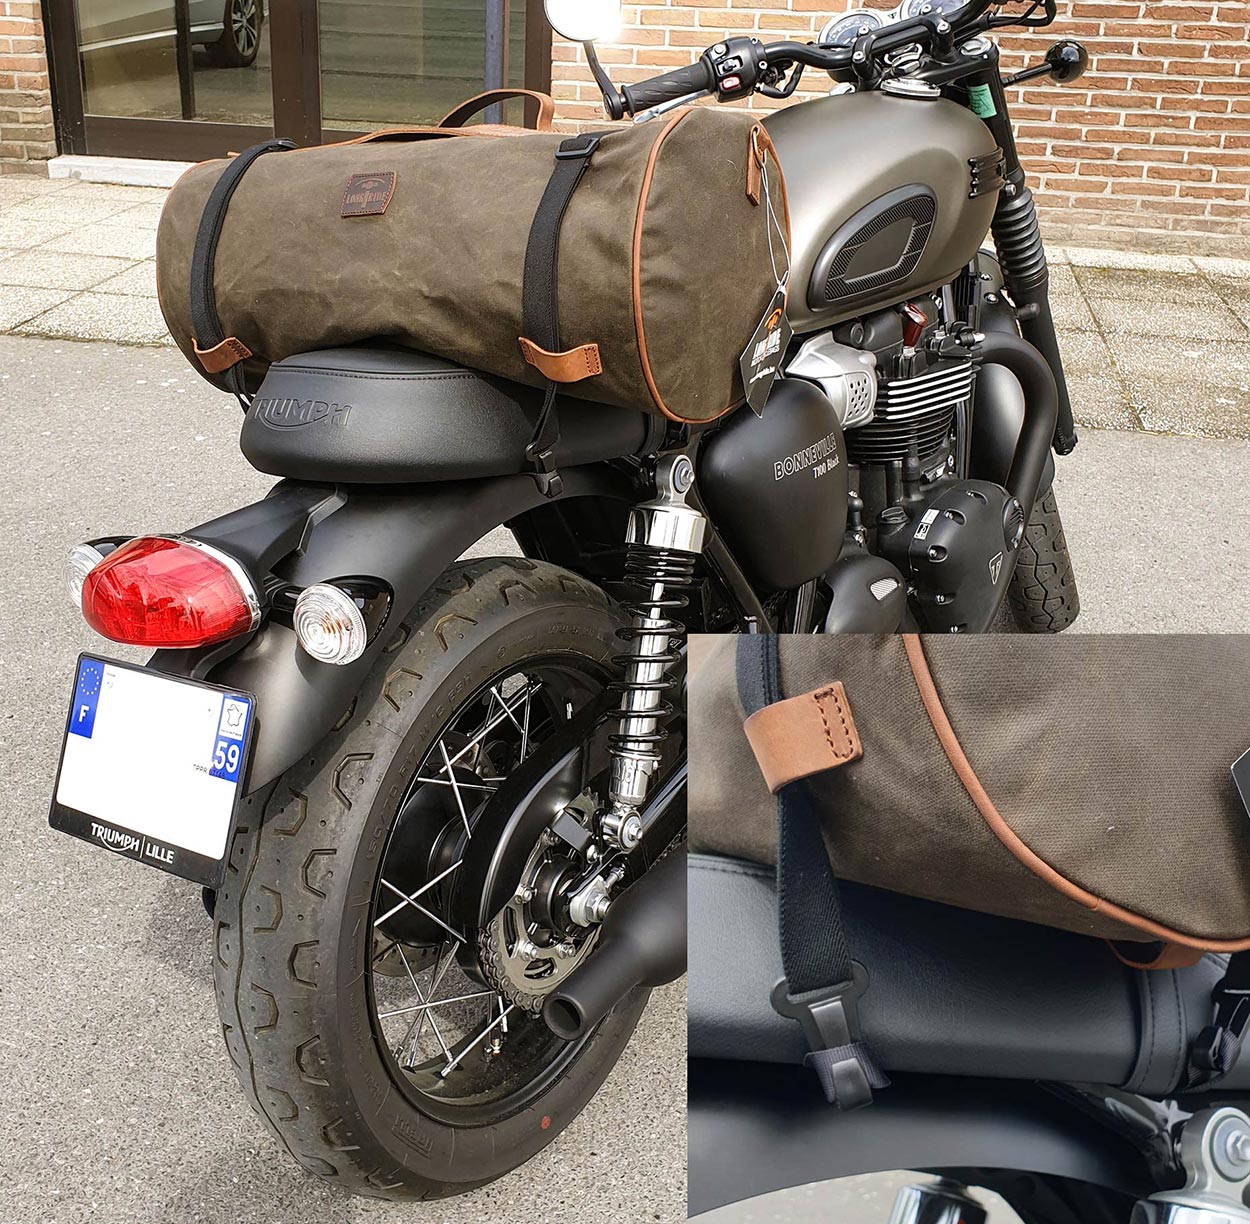 How to install retro duffle bag on Bonneville.